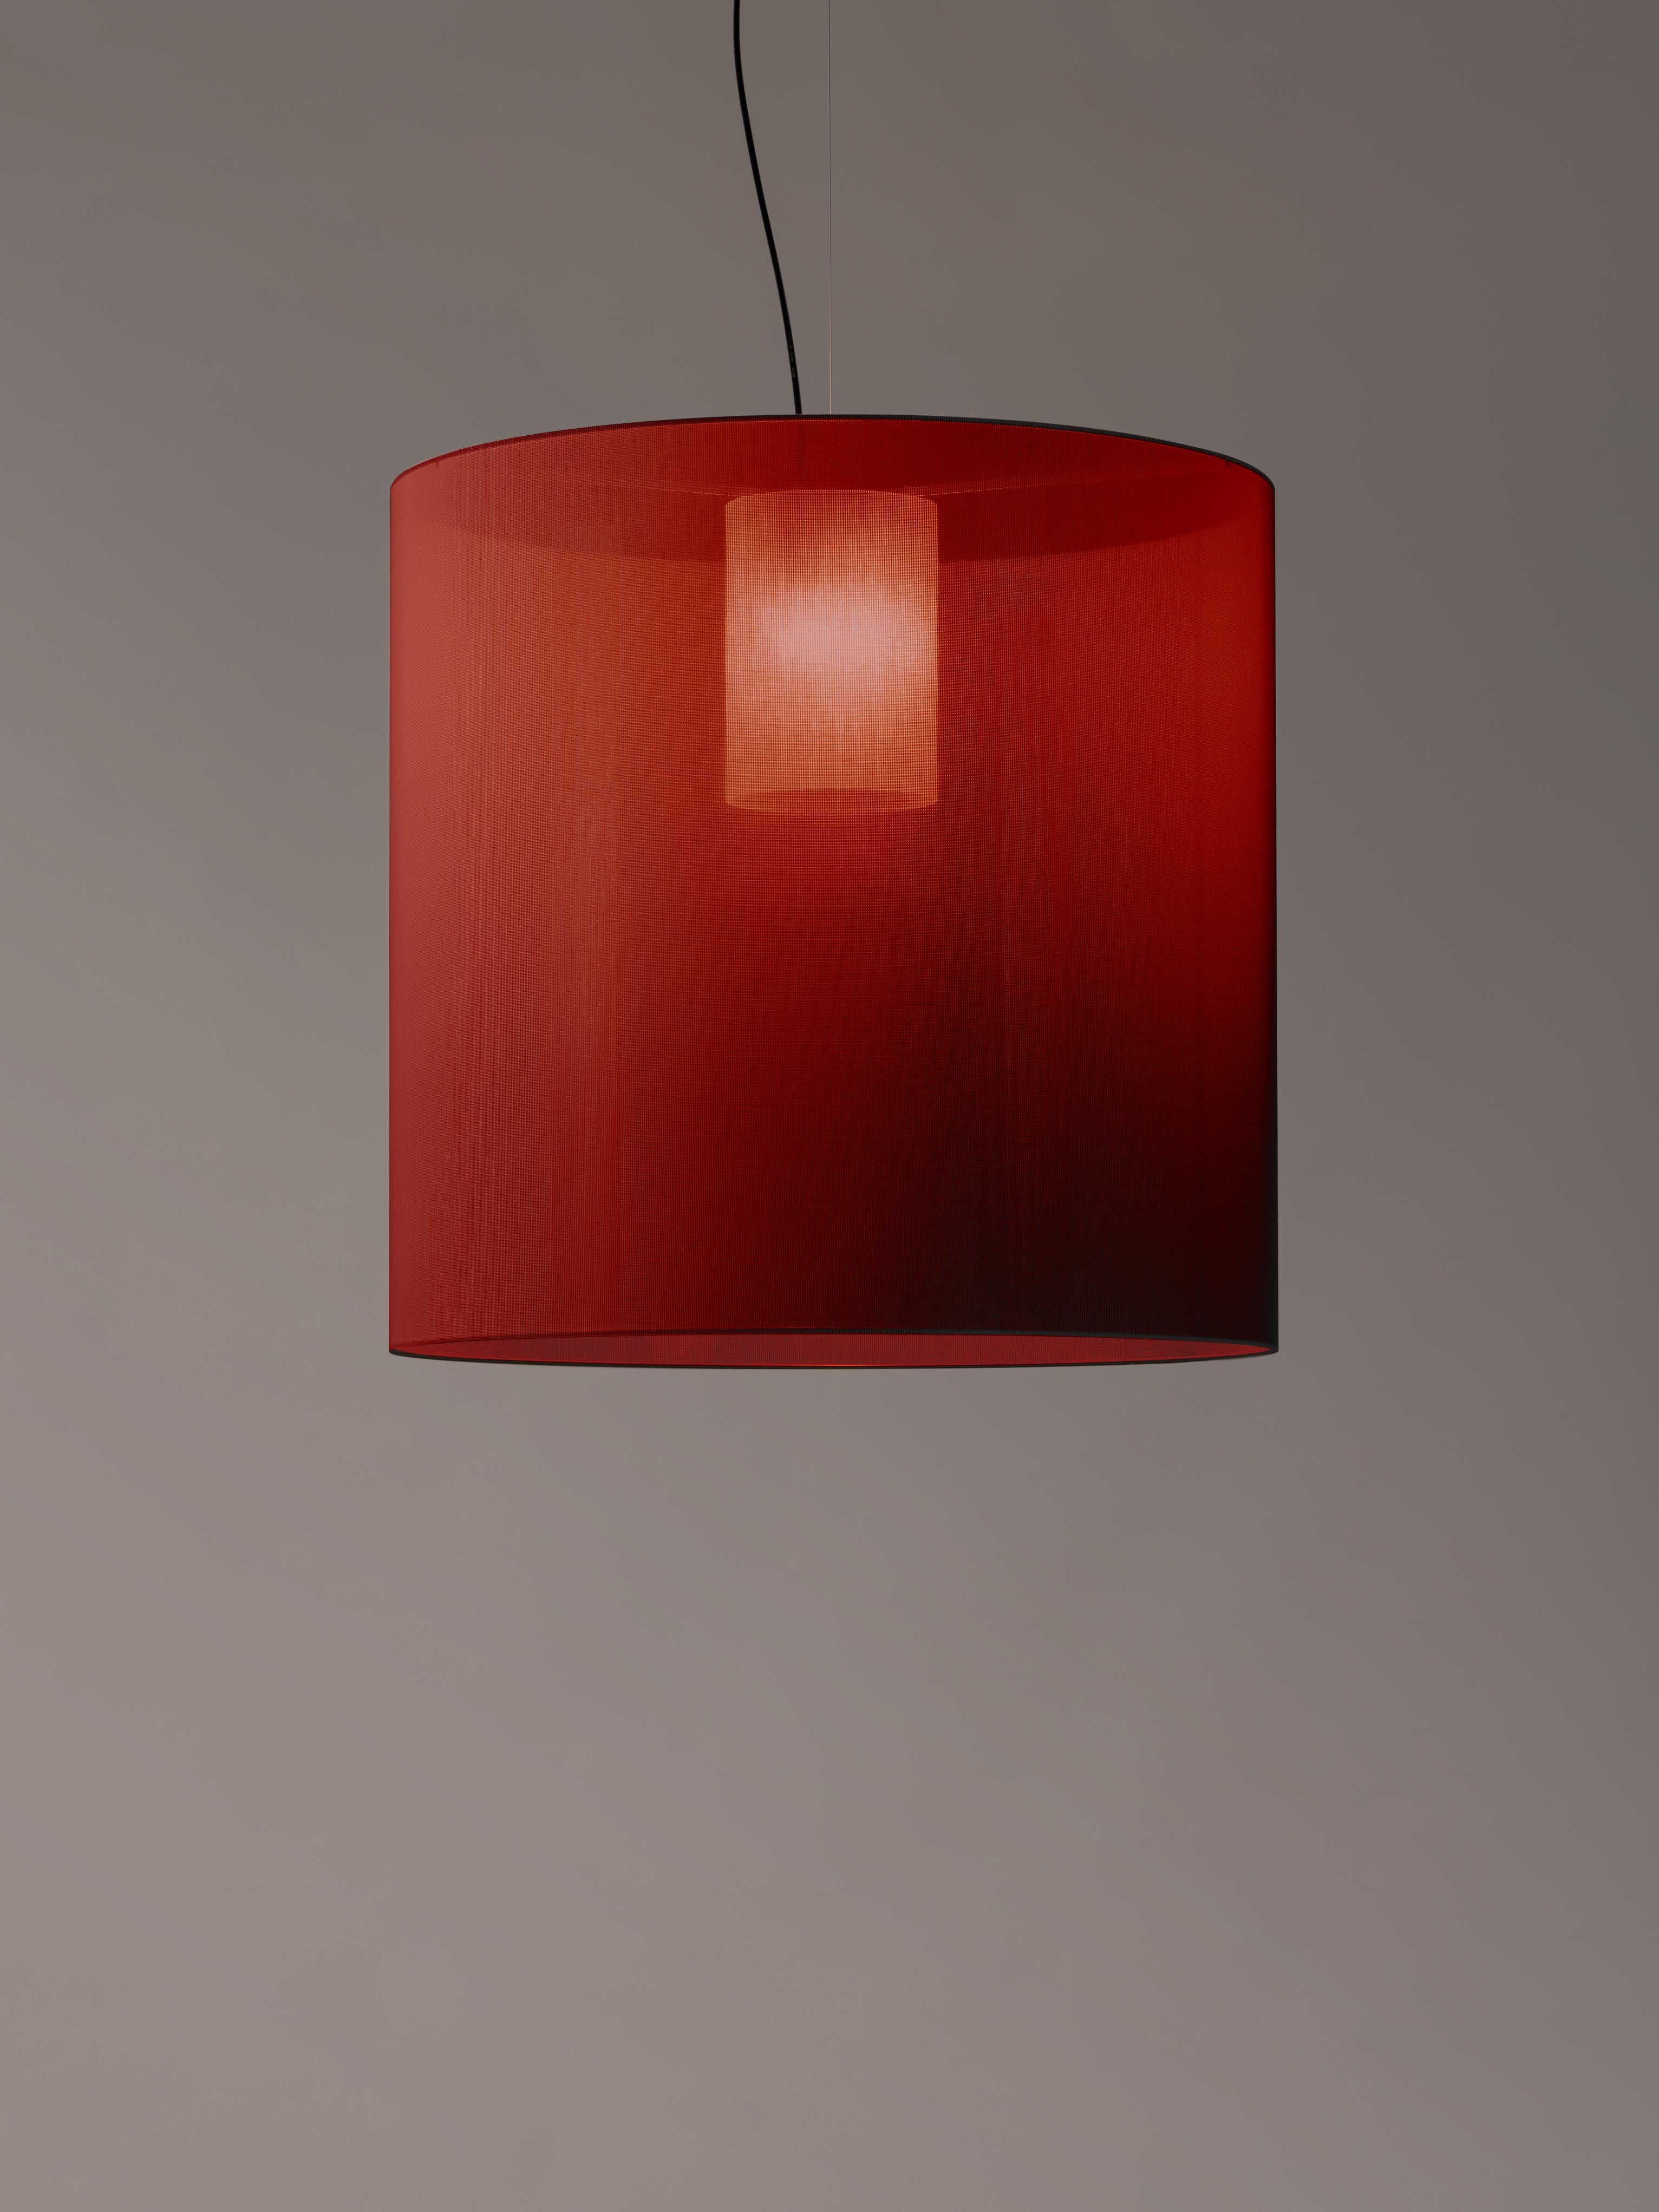 Red Moaré X pendant lamp by Antoni Arola
Dimensions: D 83 x H 81 cm
Materials: Metal, polyester.
Available in other colors and sizes.

Moaré’s multiple combinations of formats and colours make it highly versatile. The series takes its name from